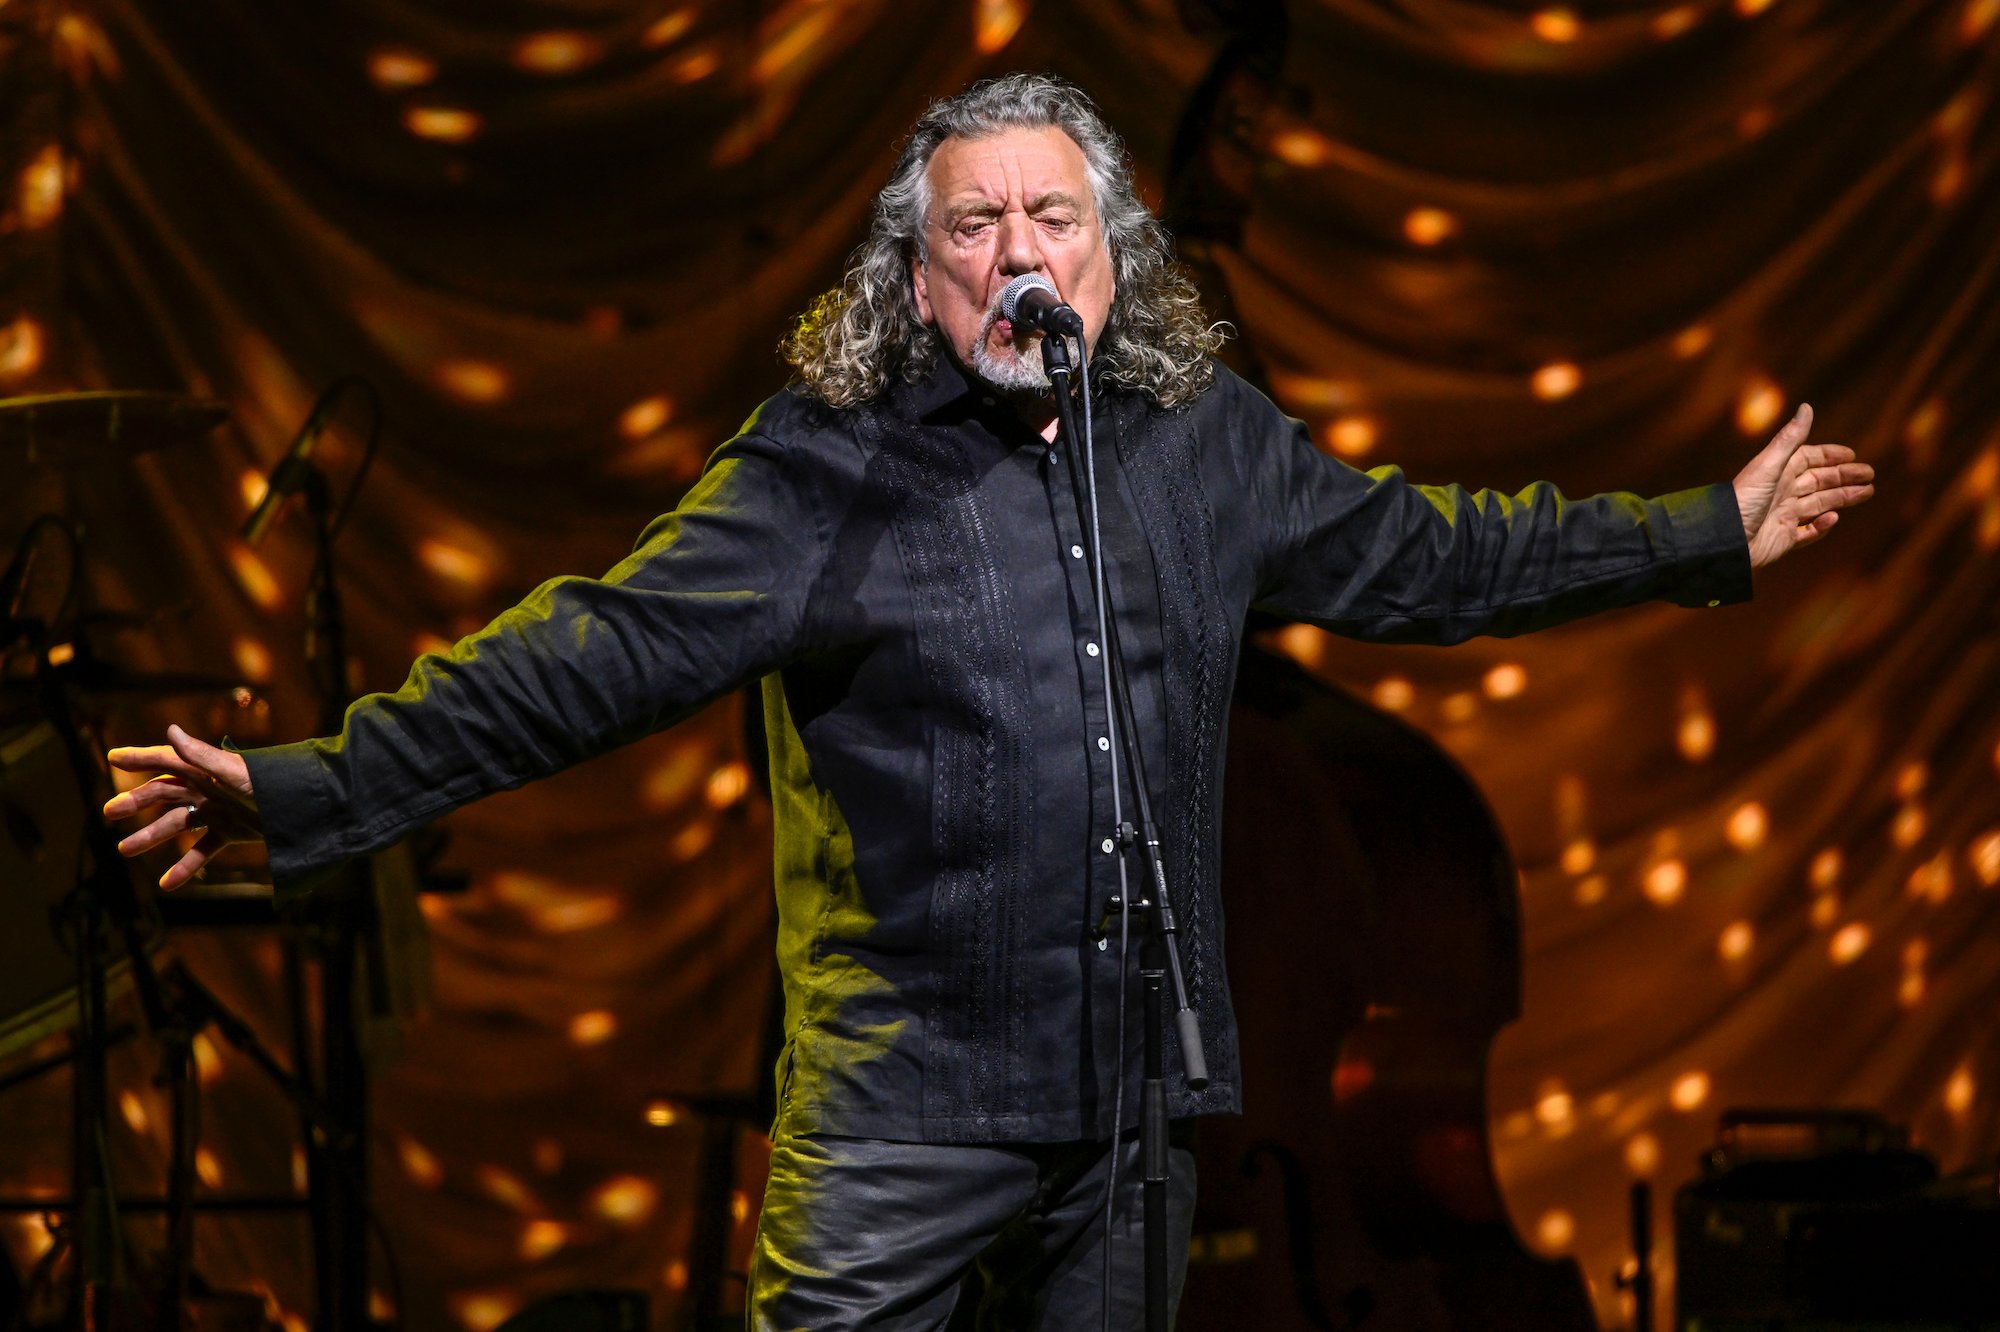 Robert Plant of Led Zeppelin performs at the Greek Theatre in 2022